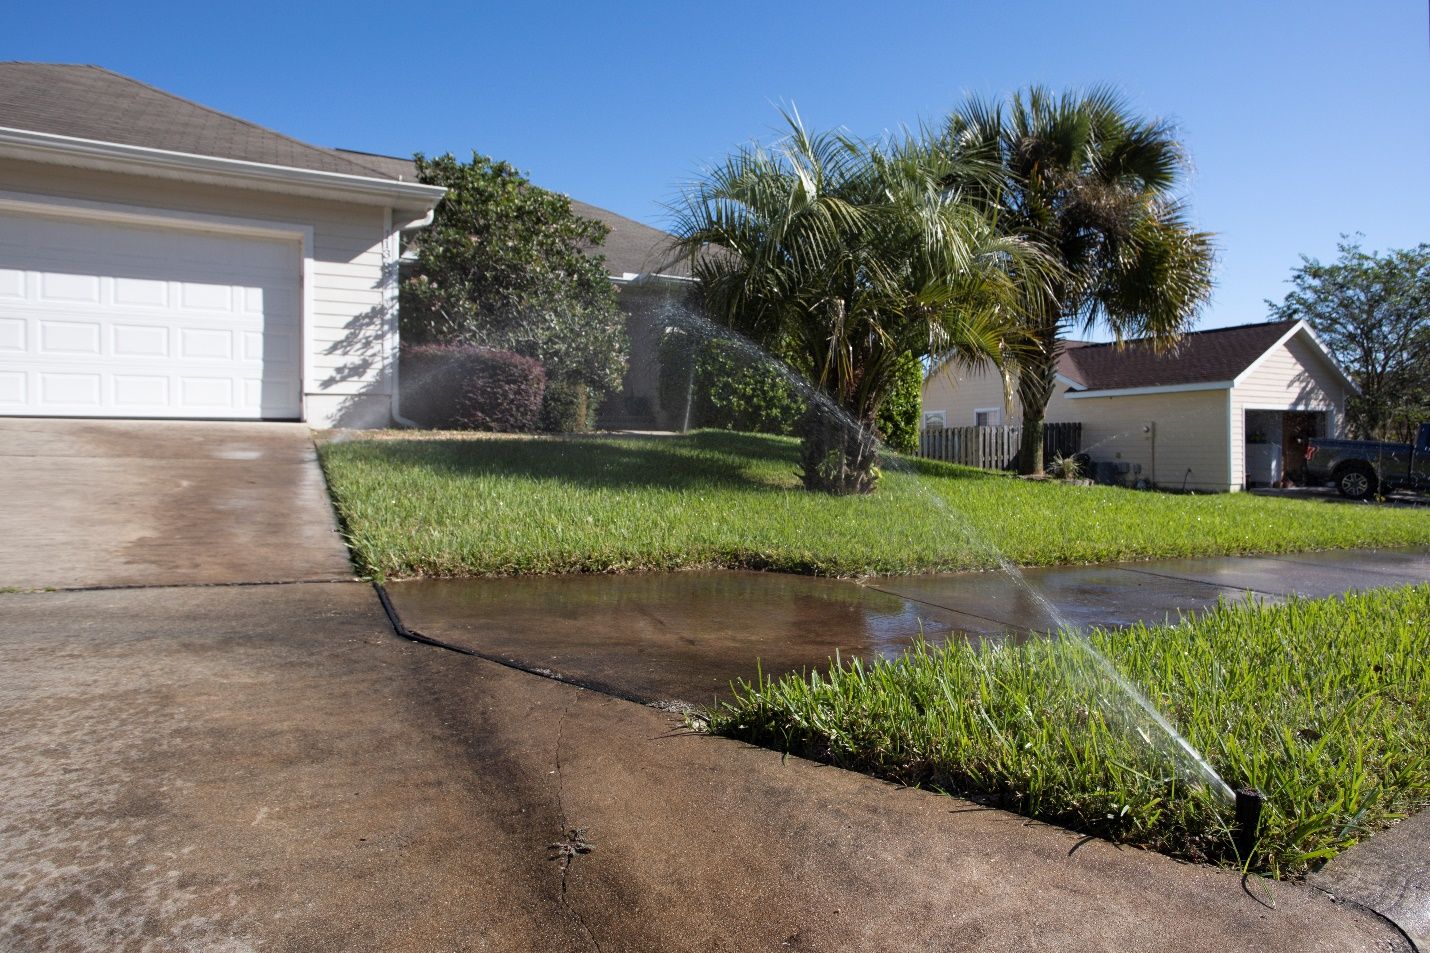 Reclaimed water used for irrigation may contain elevated levels of nutrients. Be sure to adjust sprinkler systems and only water vegetation, not sidewalks and streets. Images like this one not only represent wasteful use of water but also demonstrate how nutrients from reclaimed water irrigation could be mobilized to the environment in urban landscapes.  